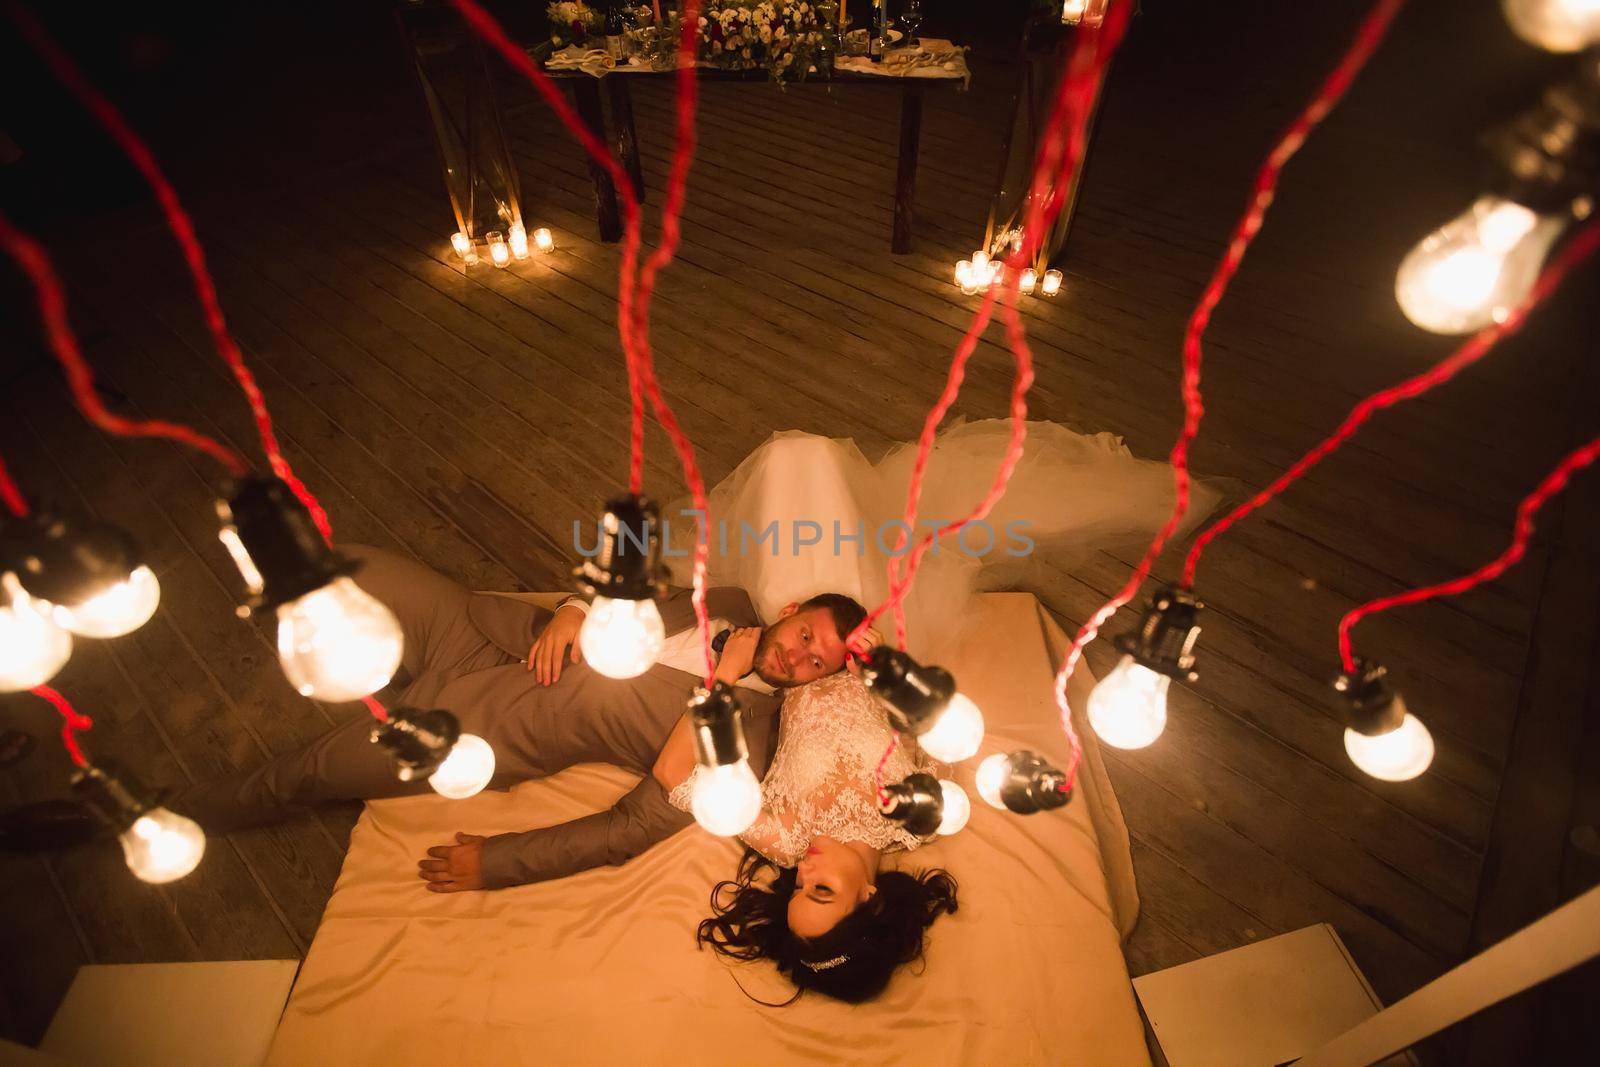 The night wedding ceremony. The bride and groom are lying on the bed. by StudioPeace